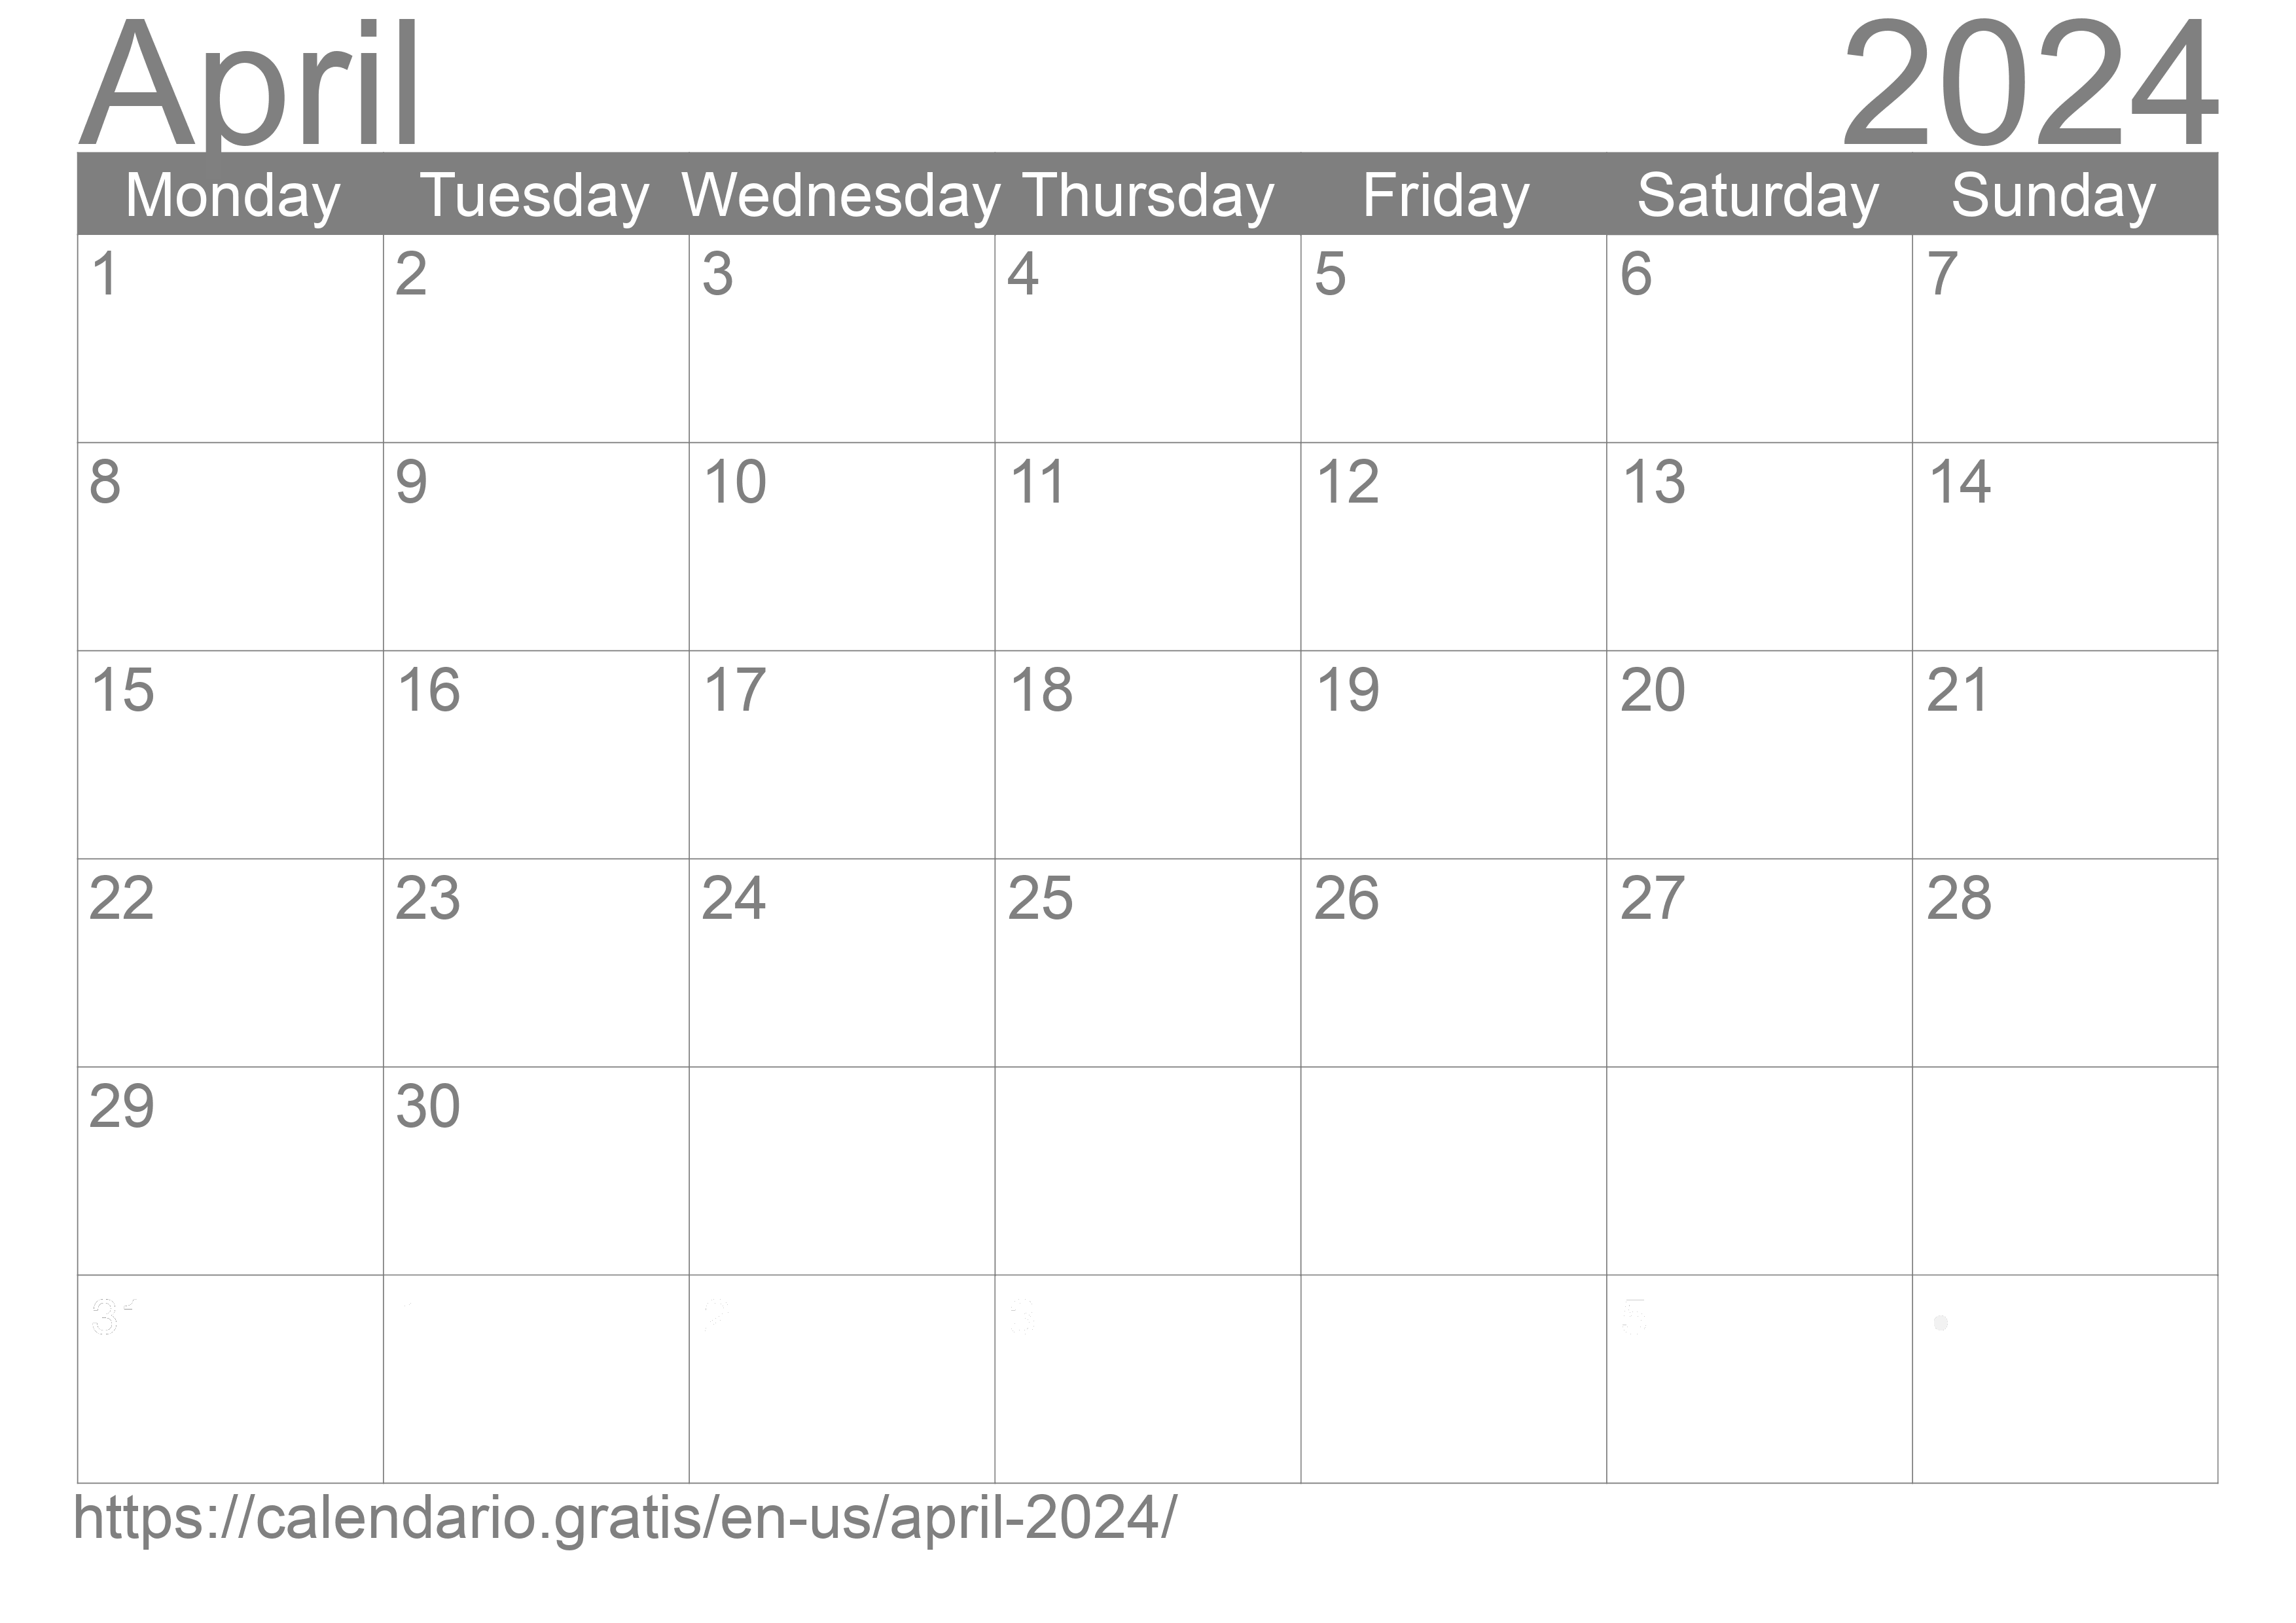 Calendar April 2024 from United States of America in English ☑️